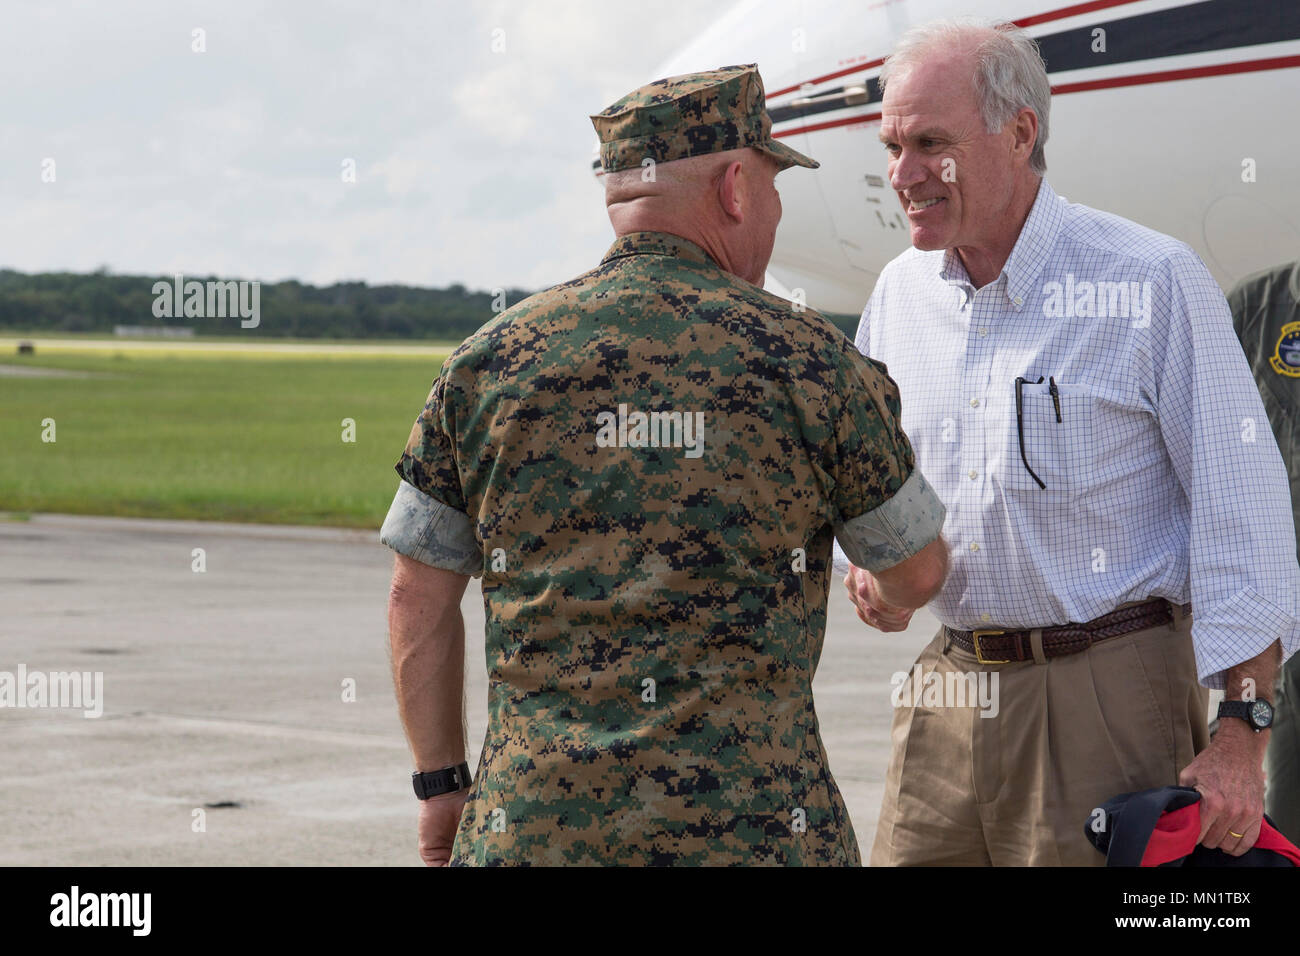 U.S. Marine Corps Brig. Gen. Austin E. Renforth, commanding general, Marine Corps Recruit Depot Parris Island and Eastern Recruiting Regions, greets Secretary of the Navy, Mr. Richard V. Spencer aboard Beaufort, S.C., Aug 10, 2017. Spencer is visiting MCAS Beaufort to tour VMFAT-501 and observe the F-35 aircraft. (Marine Corps photo by Lance Cpl. Erin R. Ramsay/ Released) Stock Photo